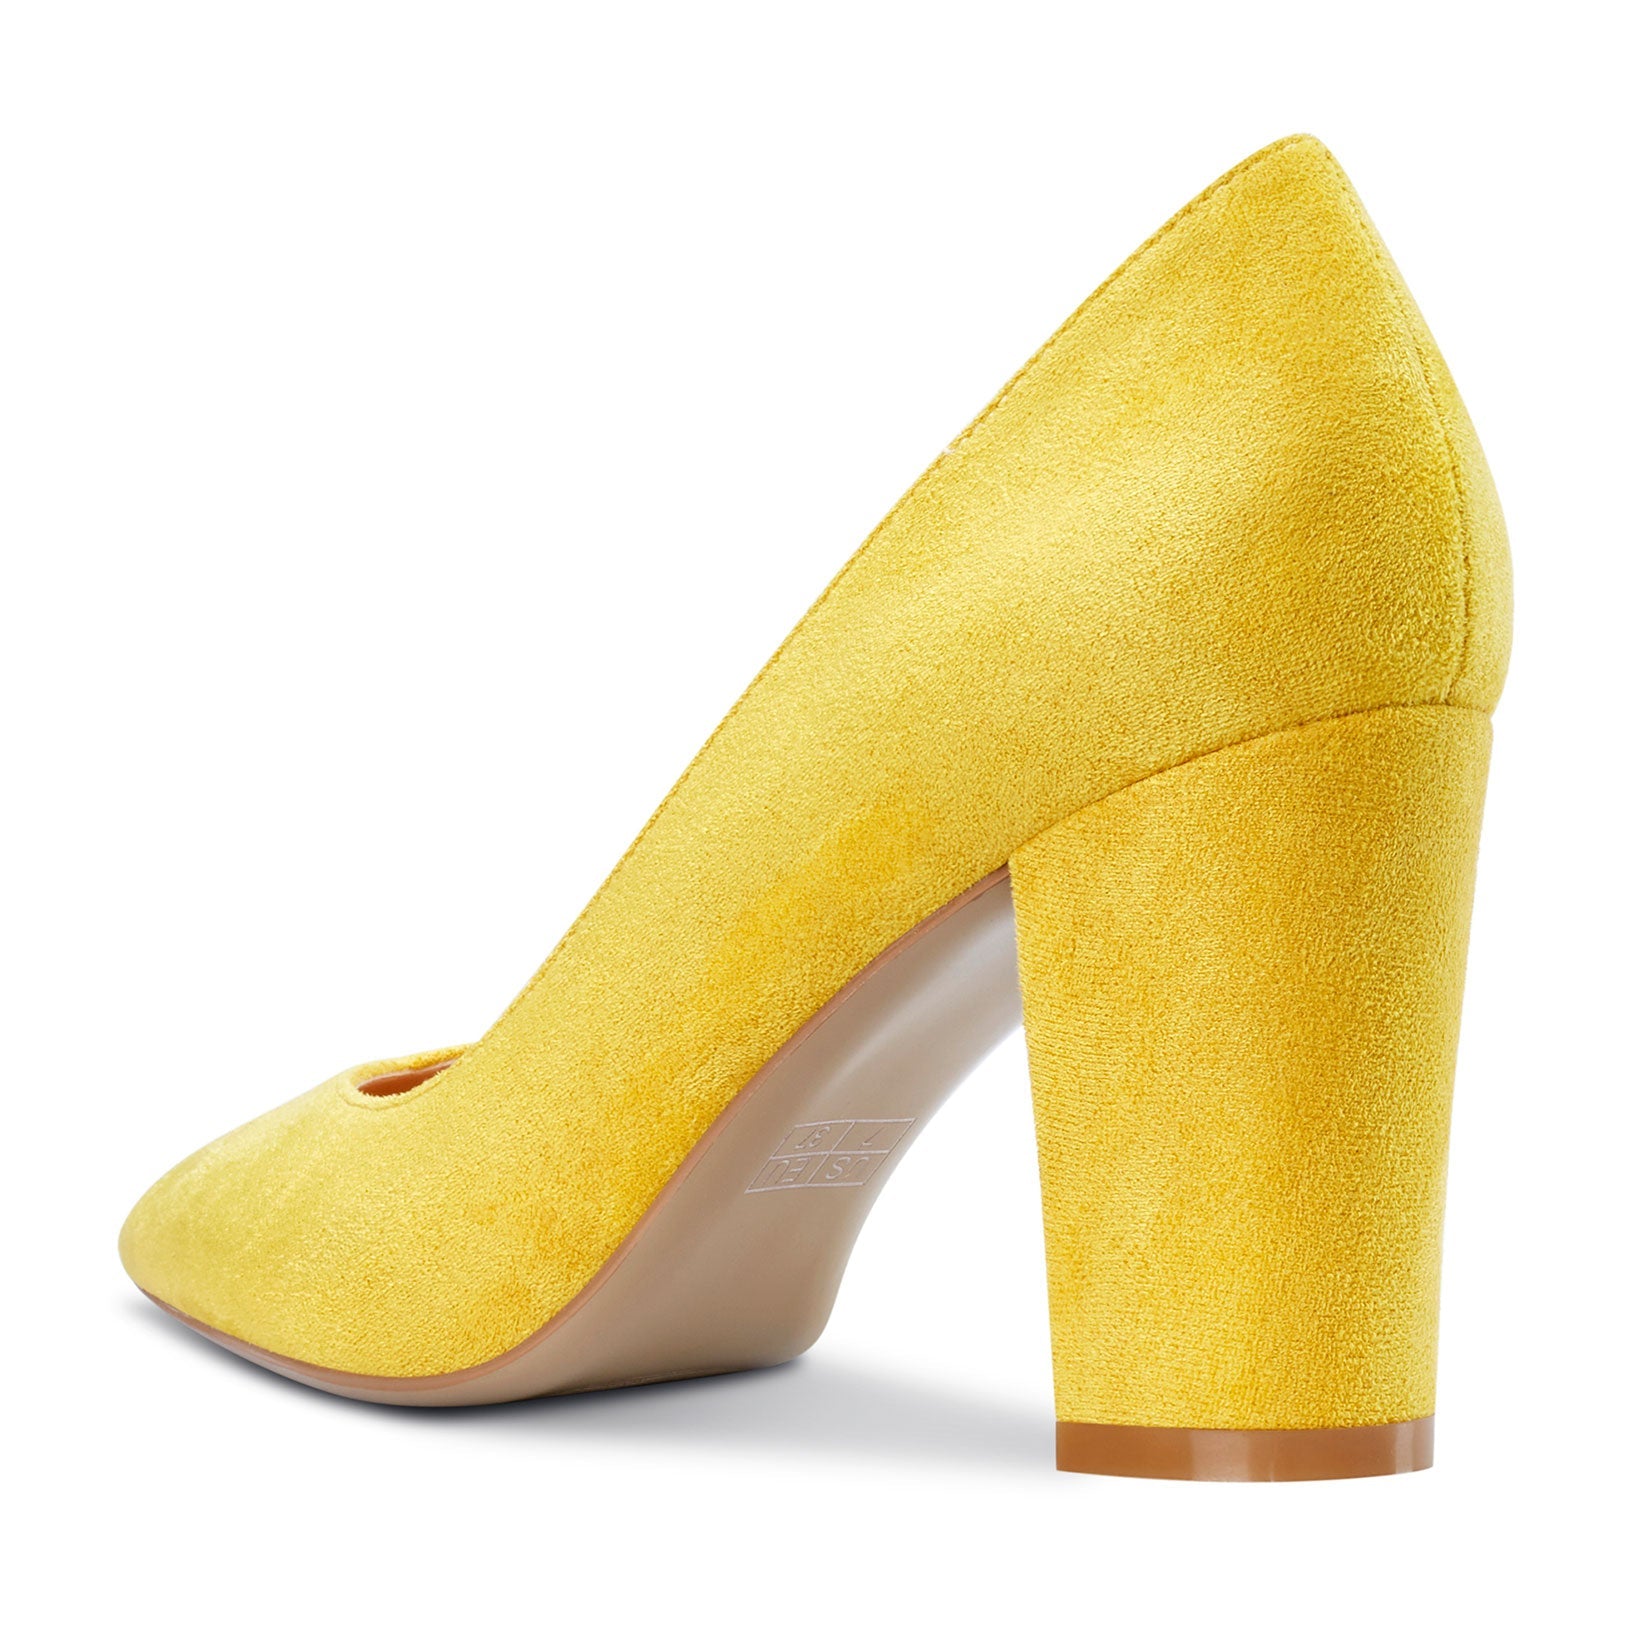 Boohoo Barely There Block Heeled Sandals With Tortoiseshell In Yellow, $35  | Asos | Lookastic